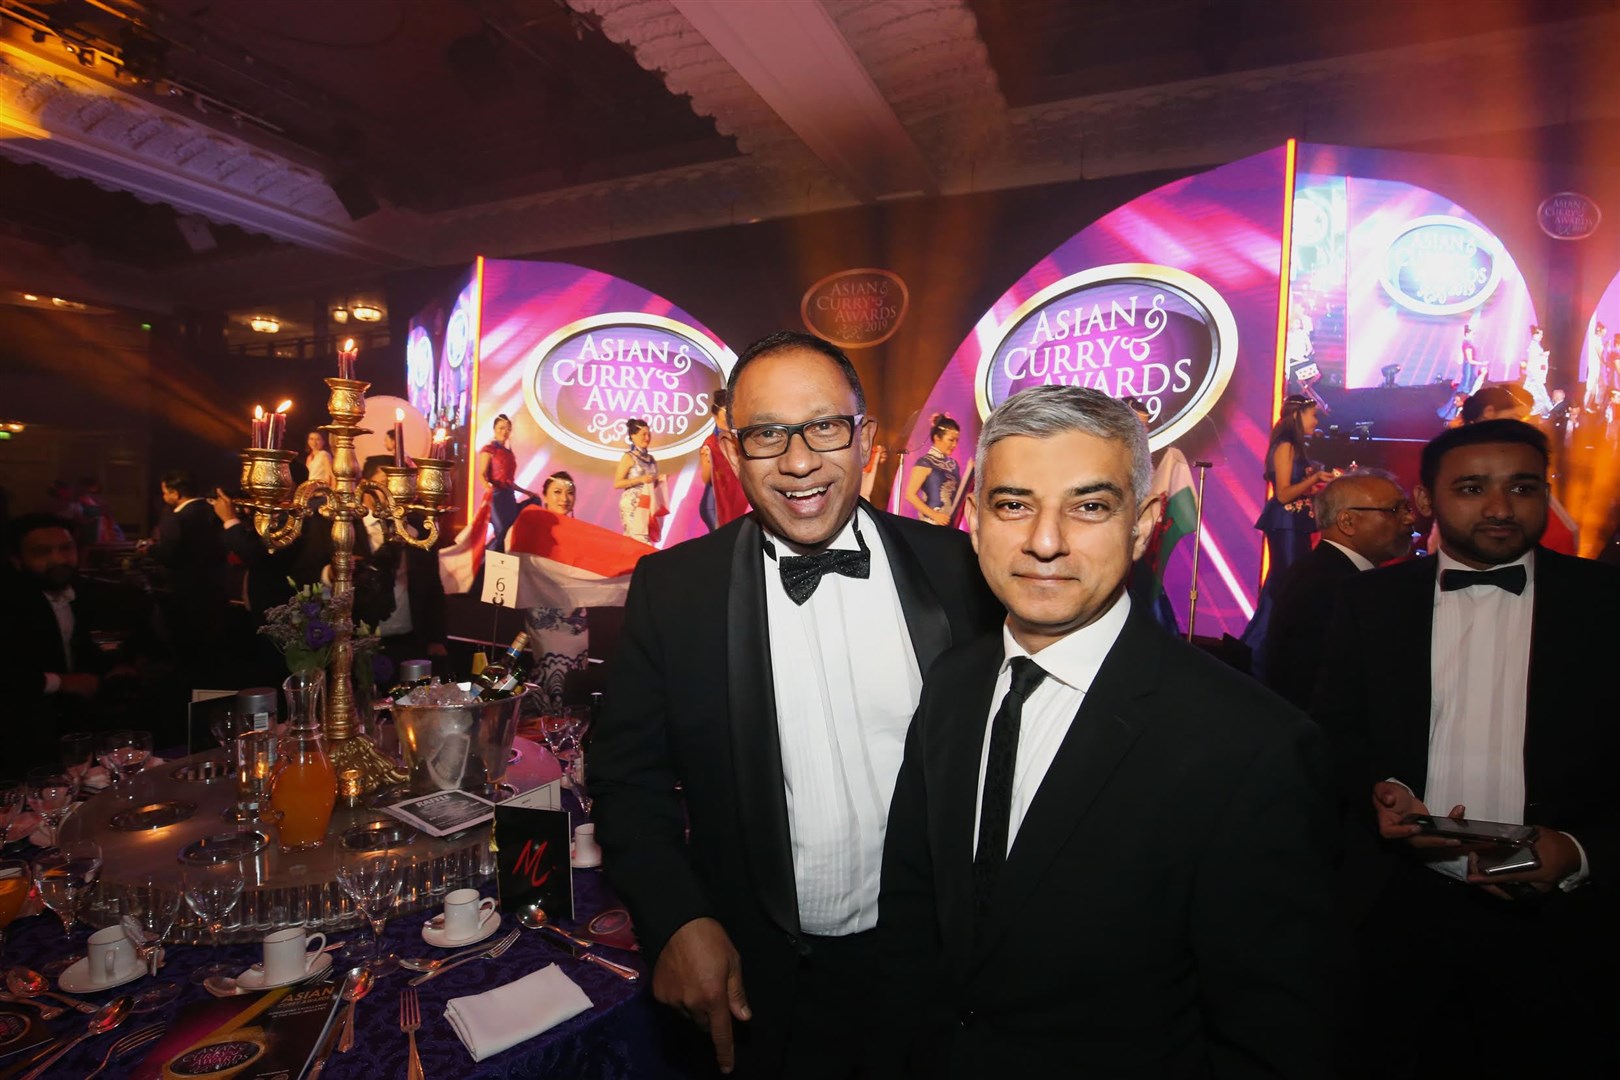 Sadiq Khan (right), who is the elected Mayor London, was the guest of honour at the Asian Curry Awards. He is pictured with Yawar Khan, the chairman of the Asian Catering Federation, which hosts the awards.